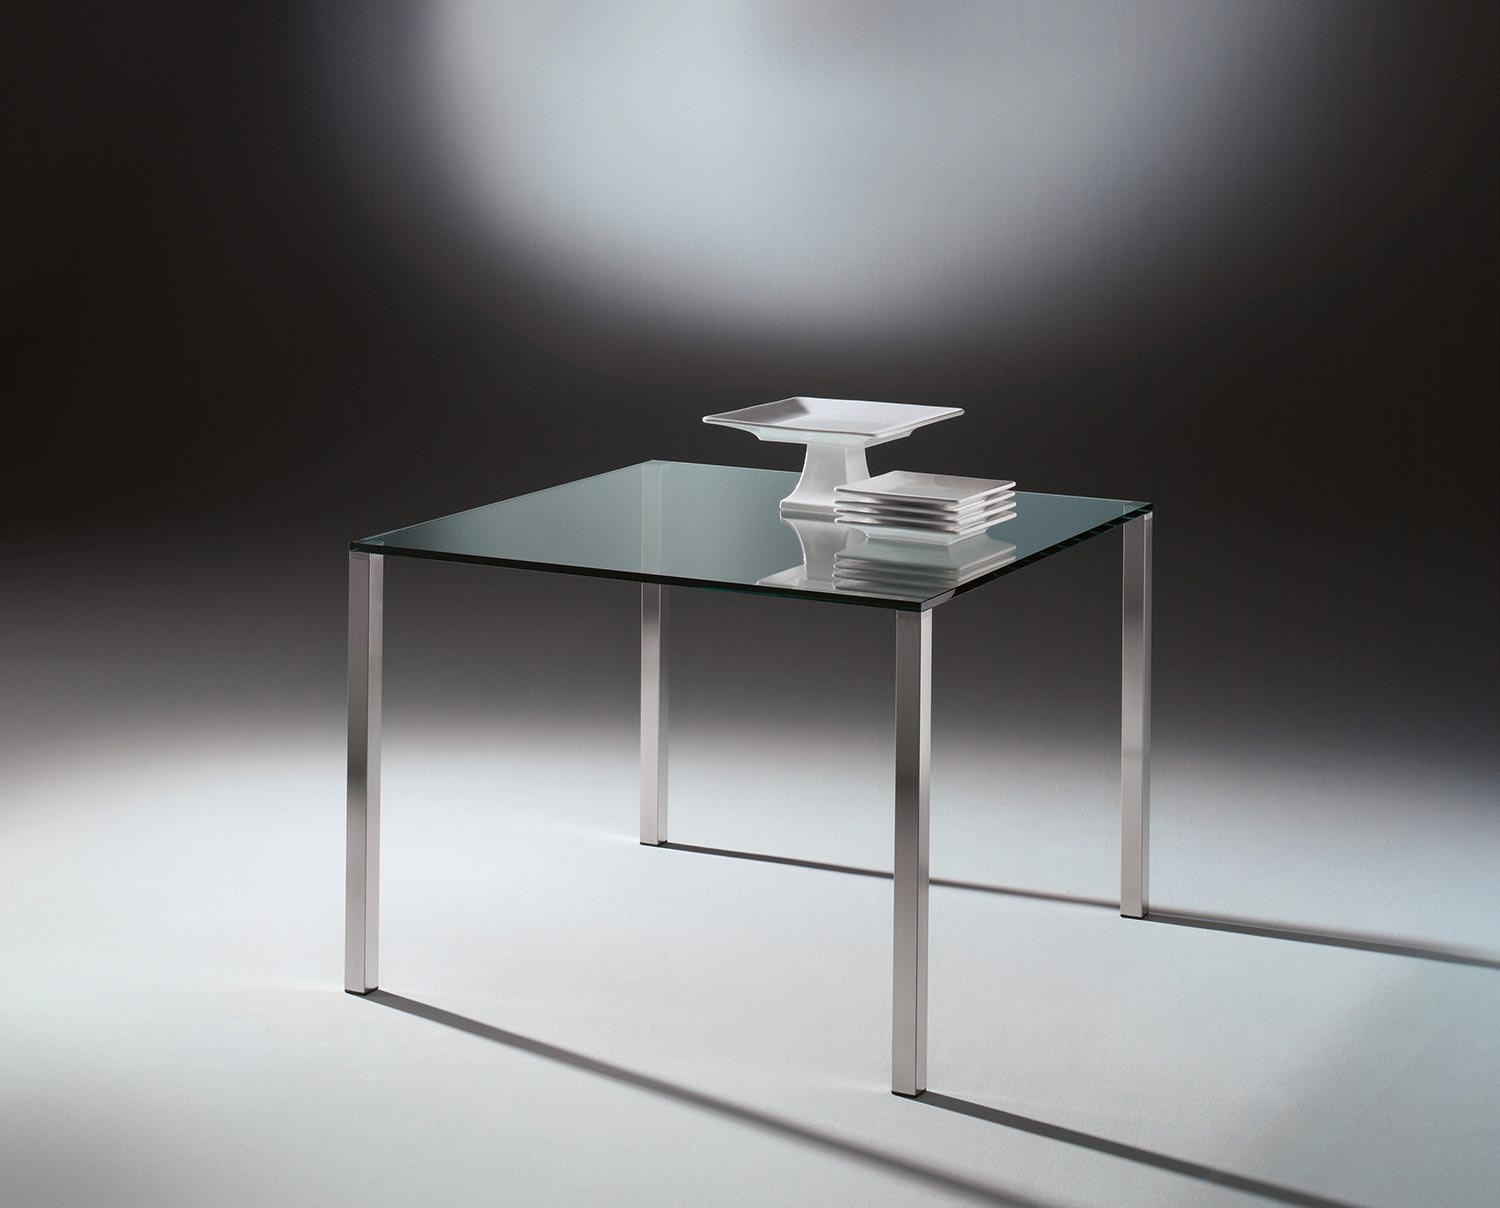 Glass table QUADRO by DREIECK DESIGN: Q 1172 - FLOATGLASS clear + table feet stainless steel brushed